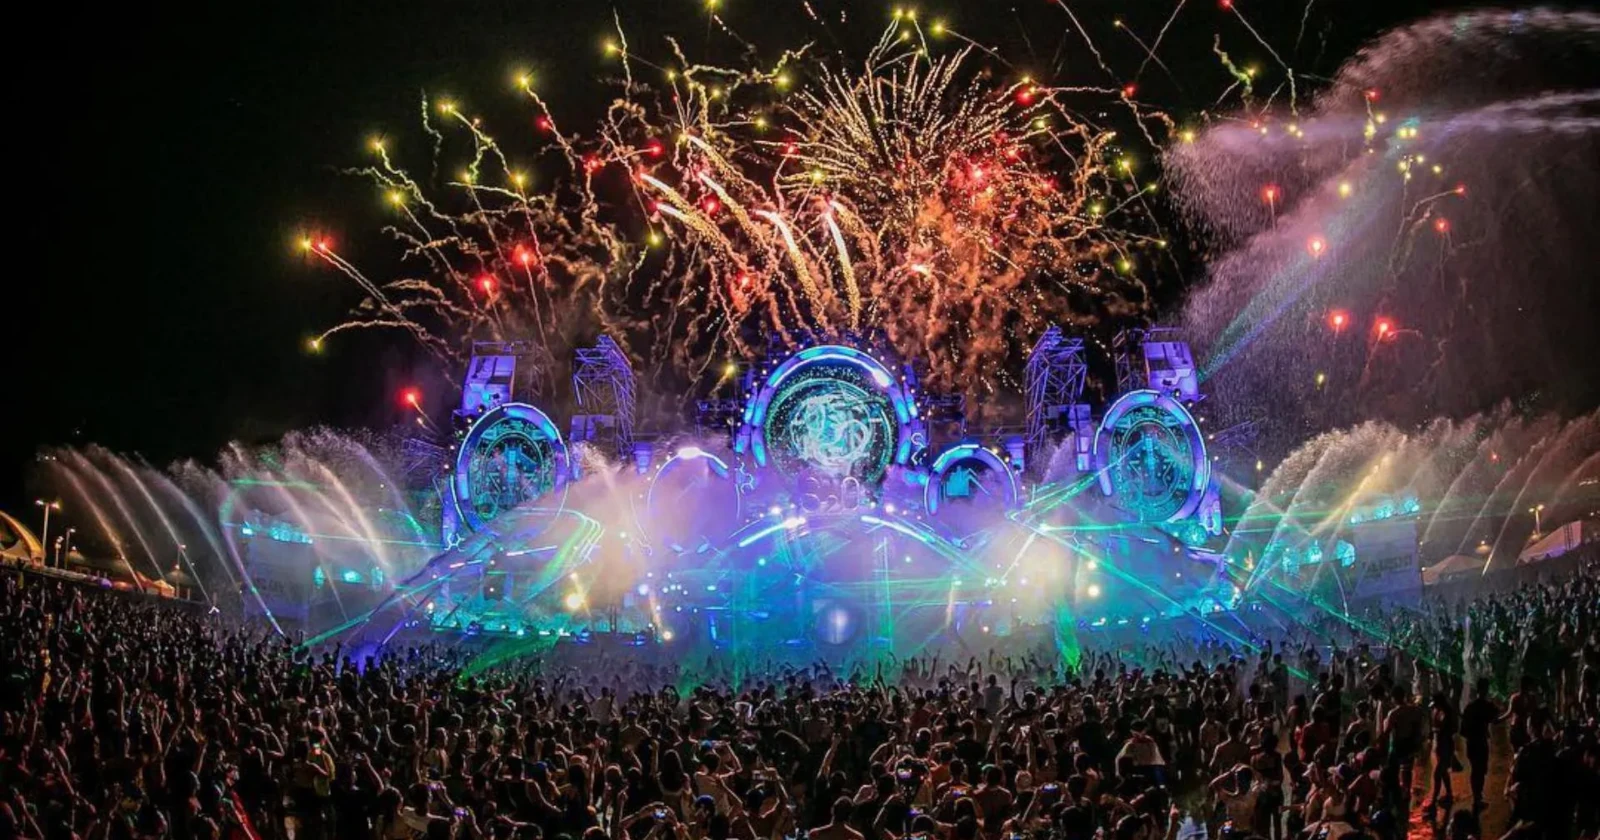 Awesome music festival in Bangkok, Thailand, with stunning fireworks.